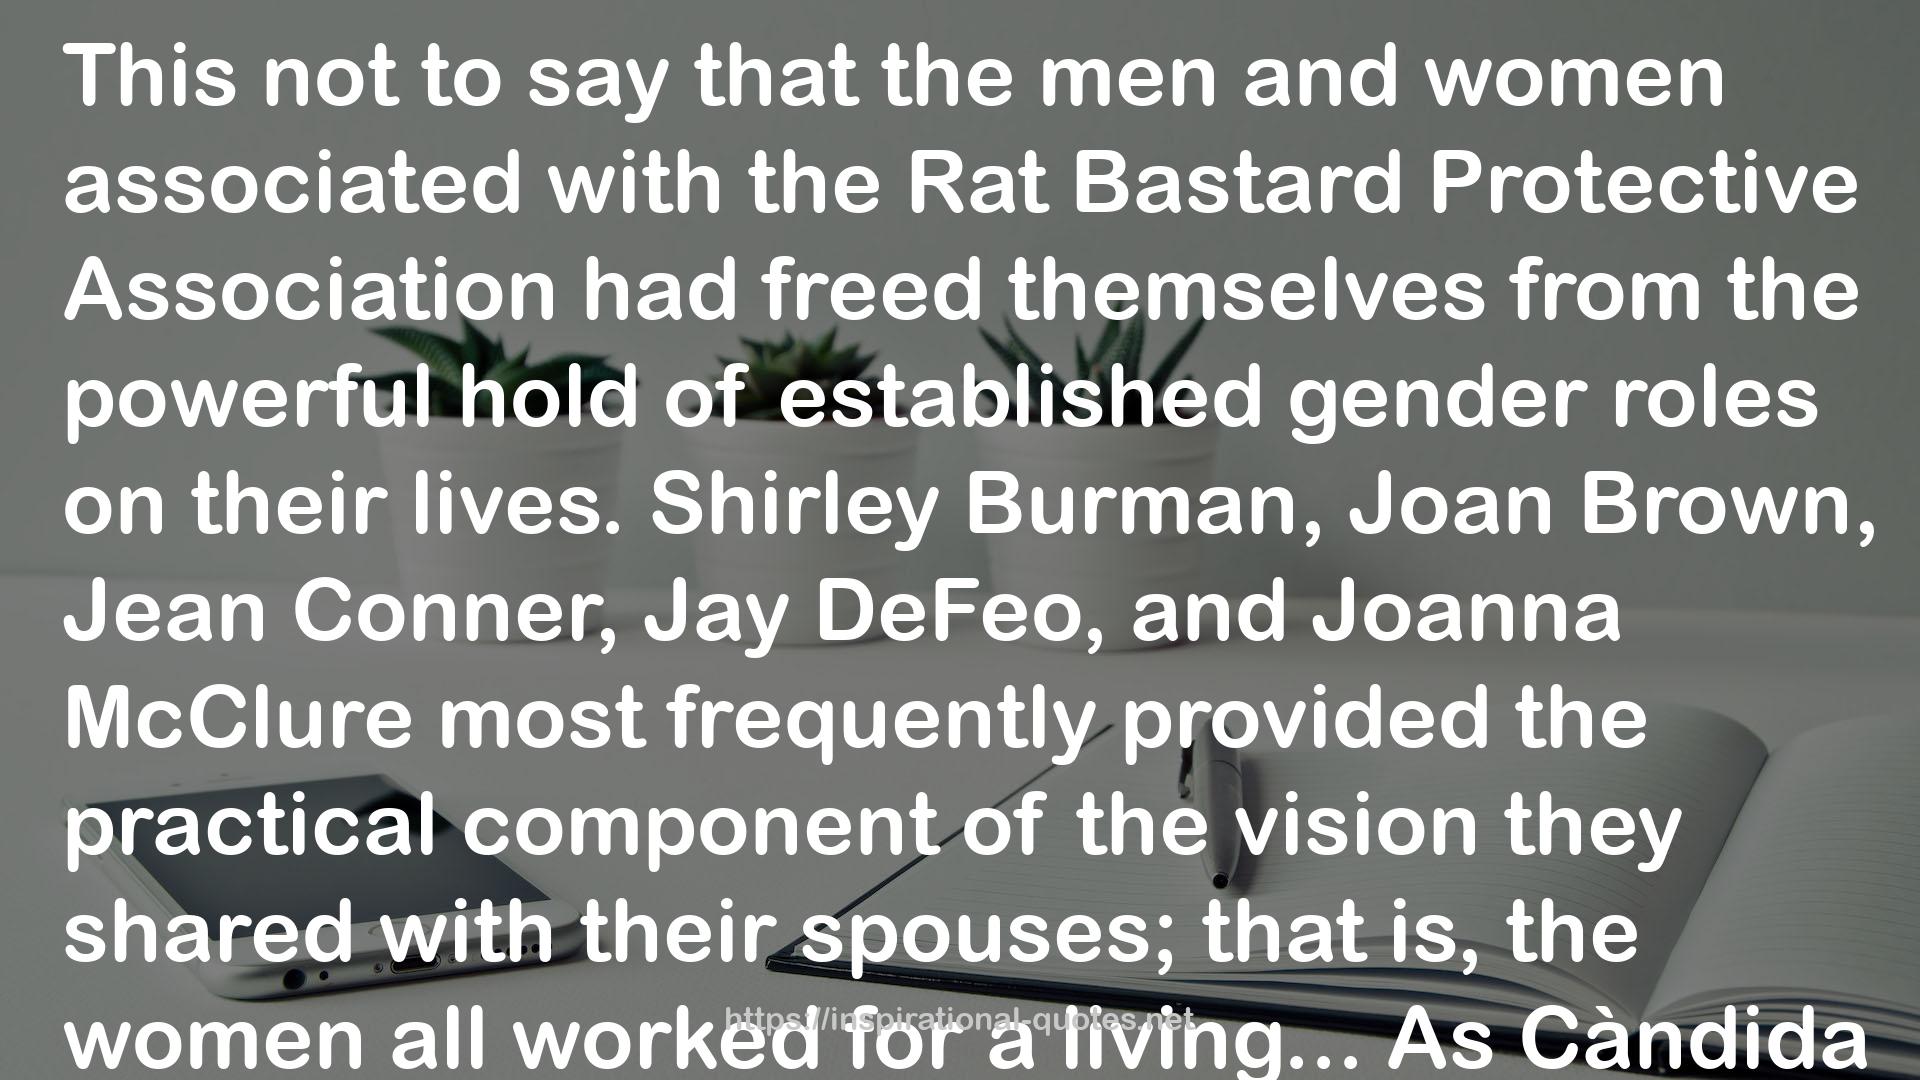 Welcome to Painterland: Bruce Conner and the Rat Bastard Protective Association QUOTES